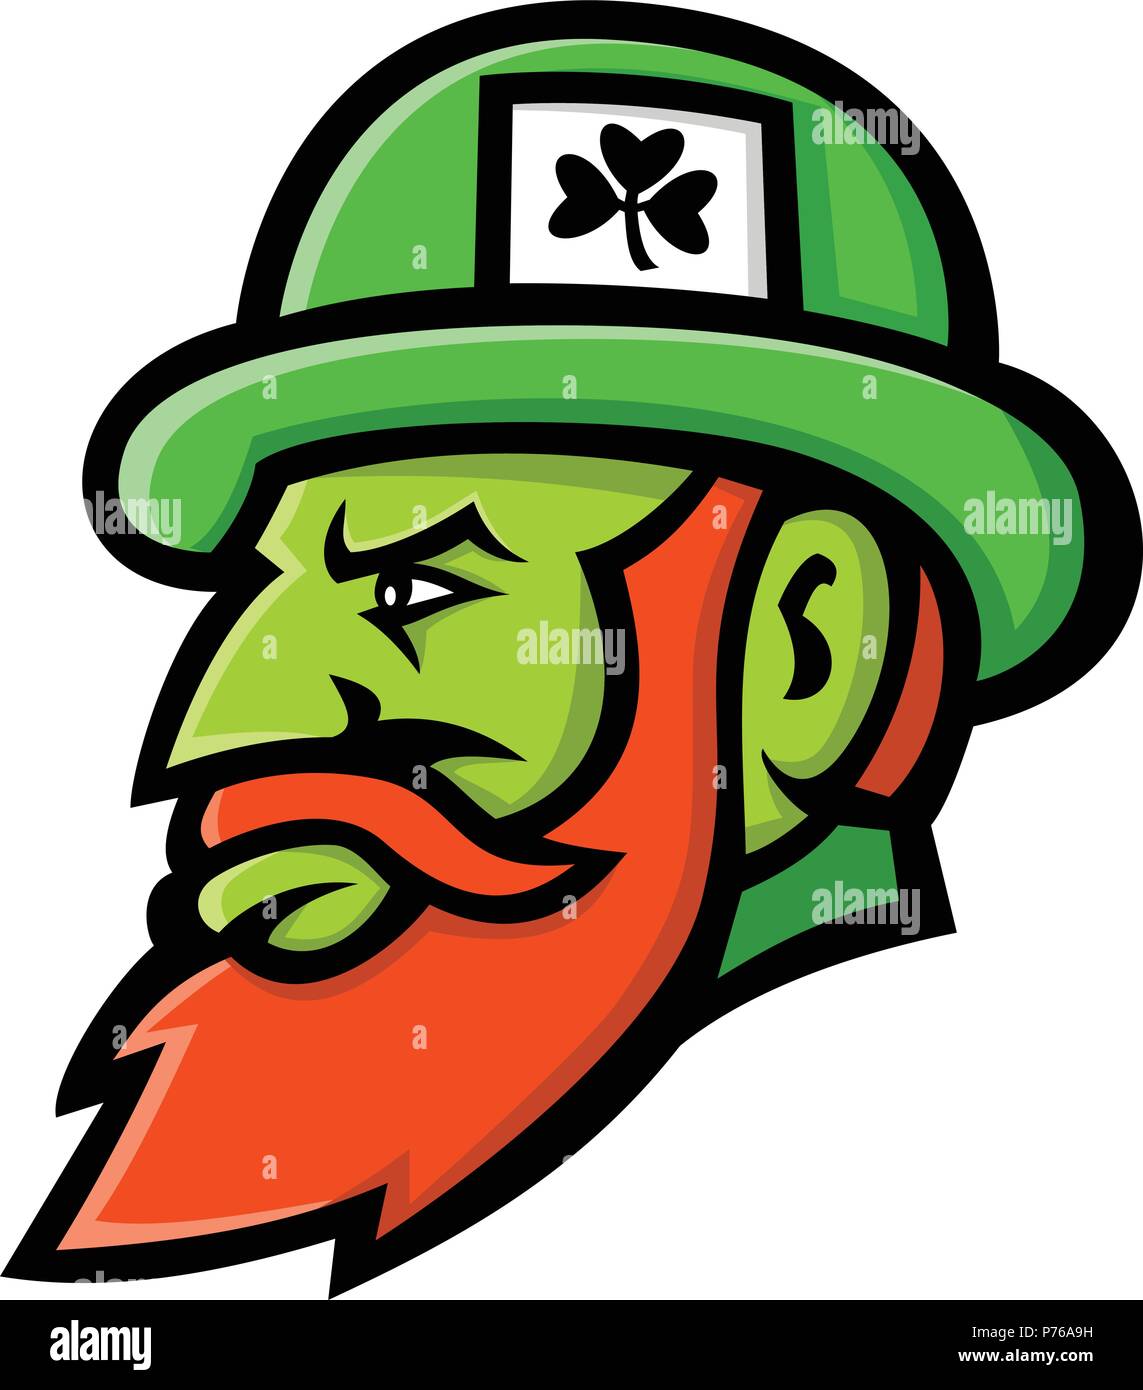 Mascot icon illustration of head of a leprechaun, a type of fairy in Irish folklore depicted as little green bearded man, wearing a coat and hat, view Stock Vector